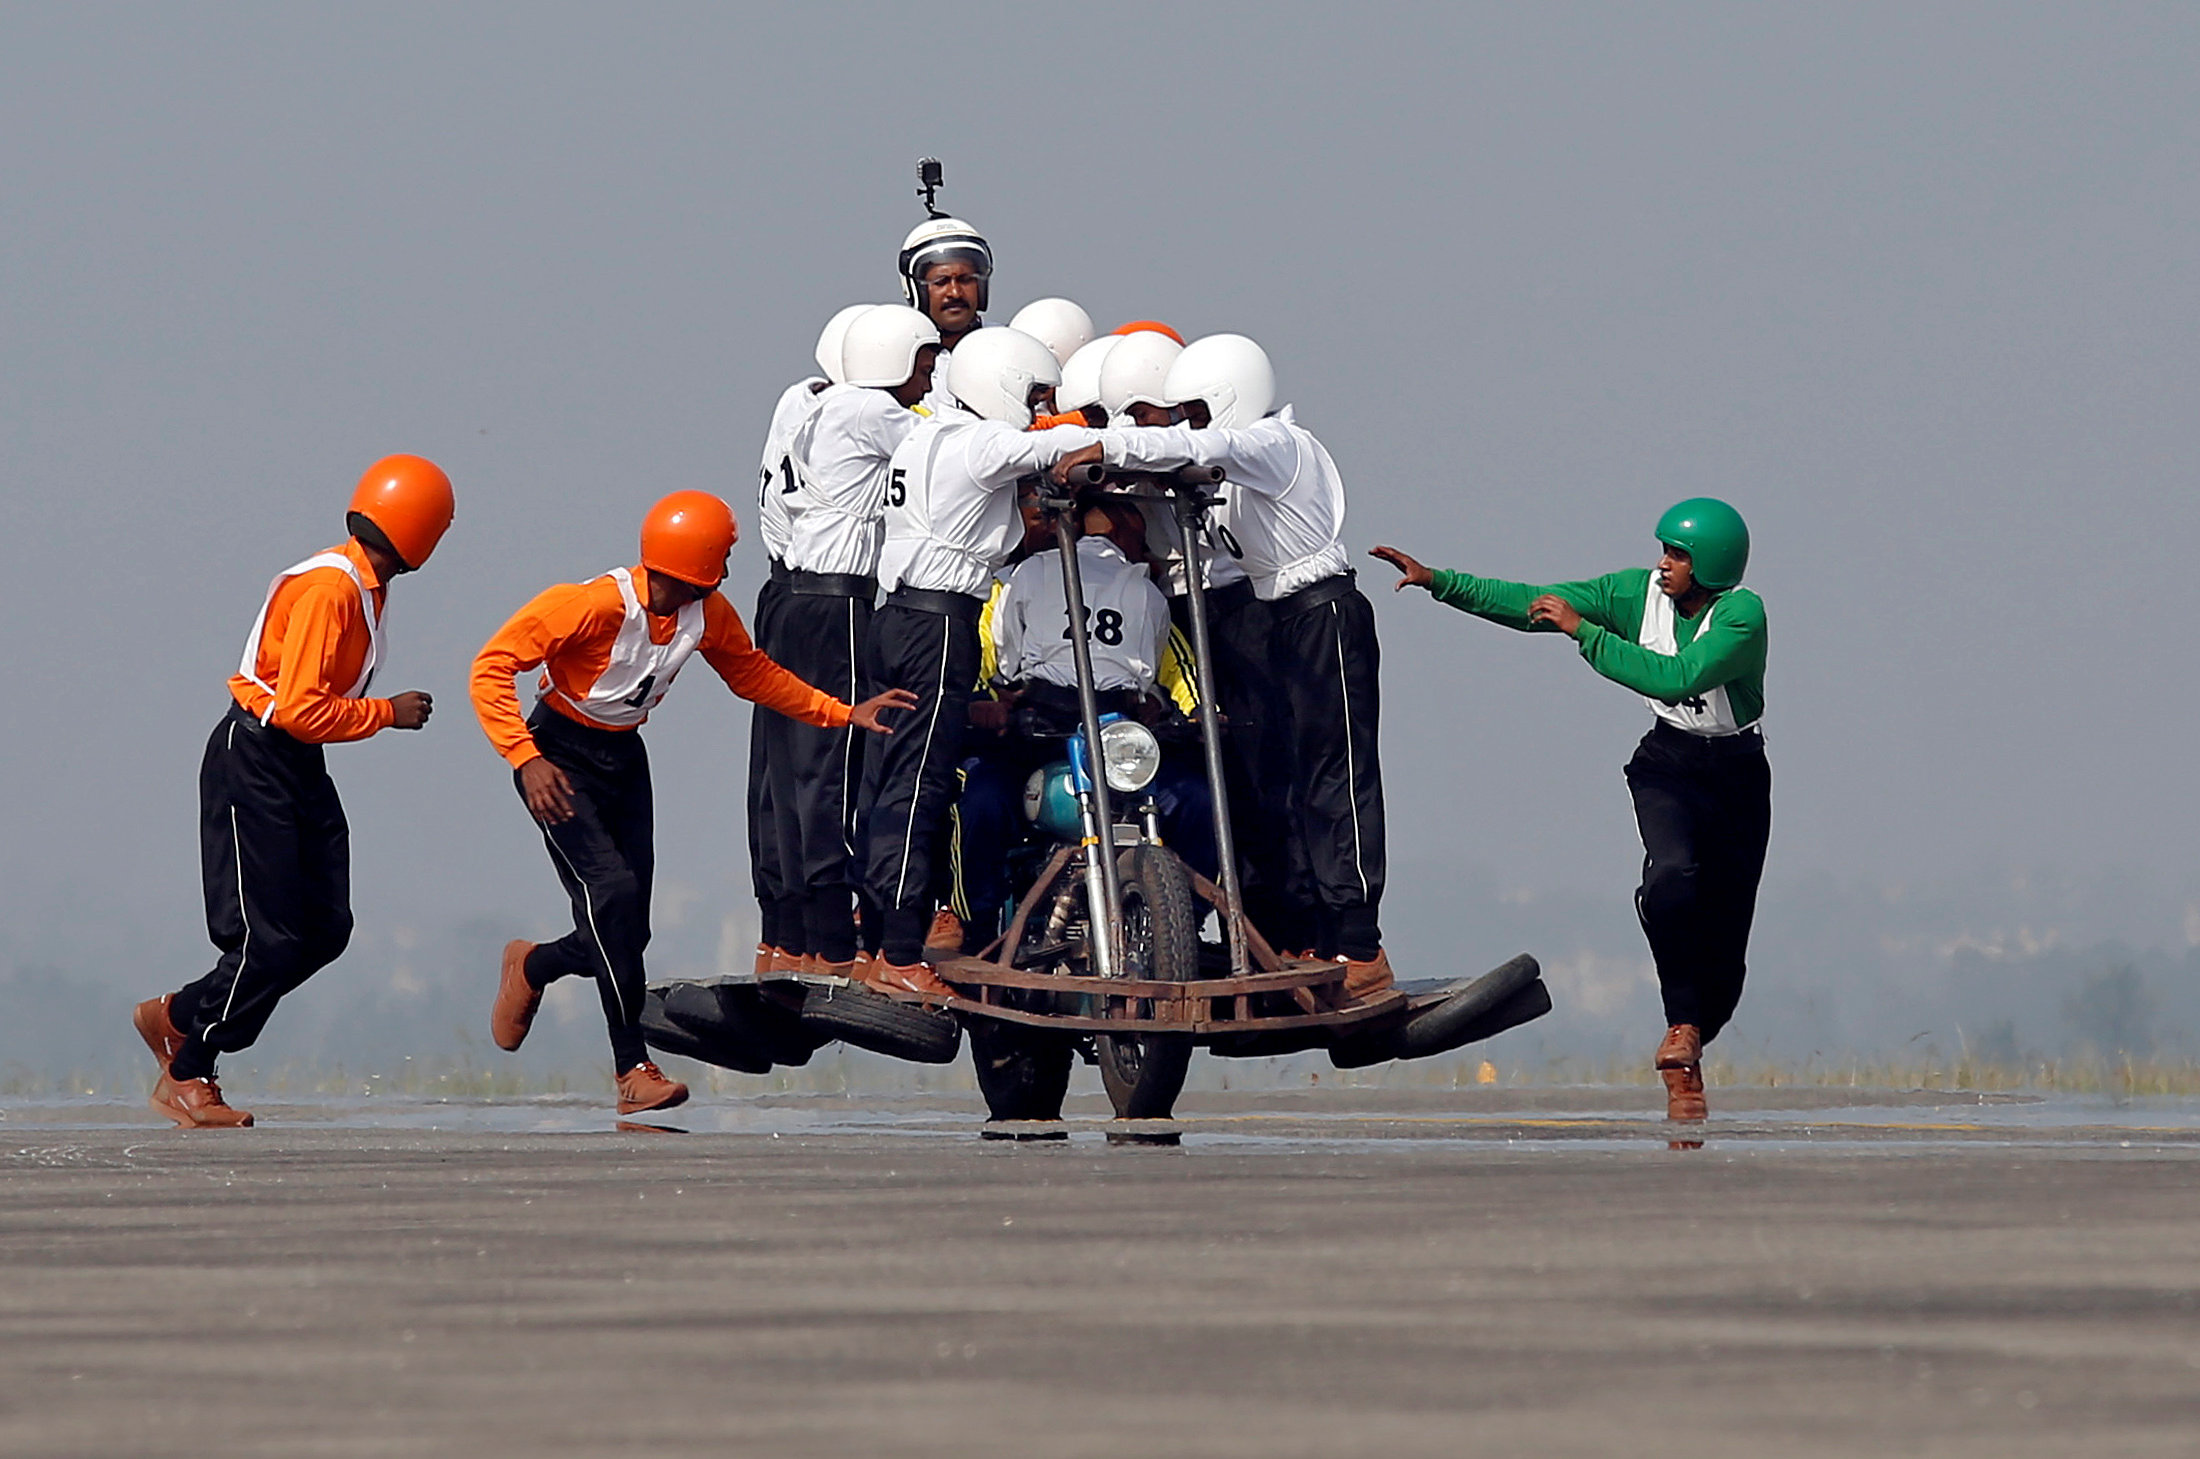 PHOTO: Members of Army Service Corps "Tornadoes" run to climb onto a motorcycle as they attempt to create a world record for most men on a single moving motorcycle at the Yelahanka Air Force Station in Bengaluru, India, Nov. 19, 2017.